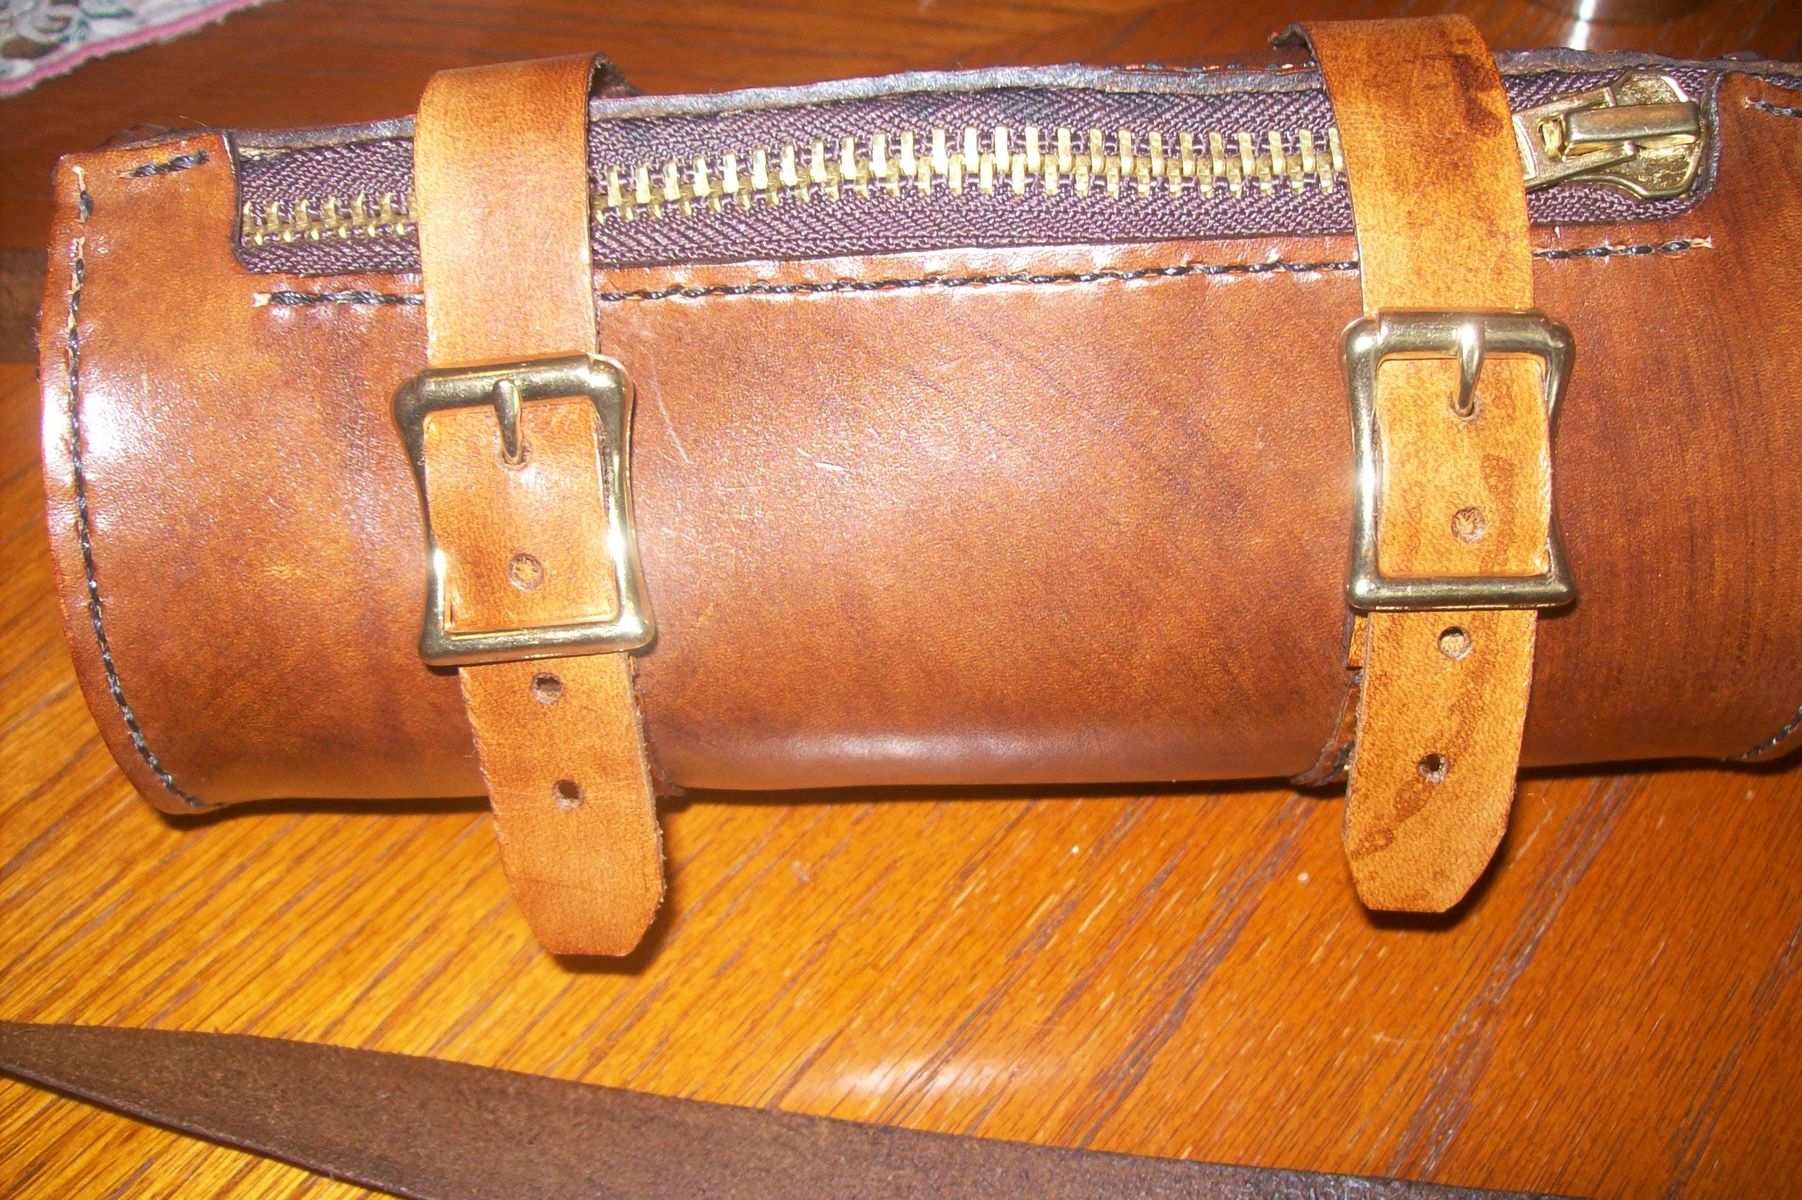 Buy Hand Crafted Kayleys Custom Leather Tube Bag, made to order from ...